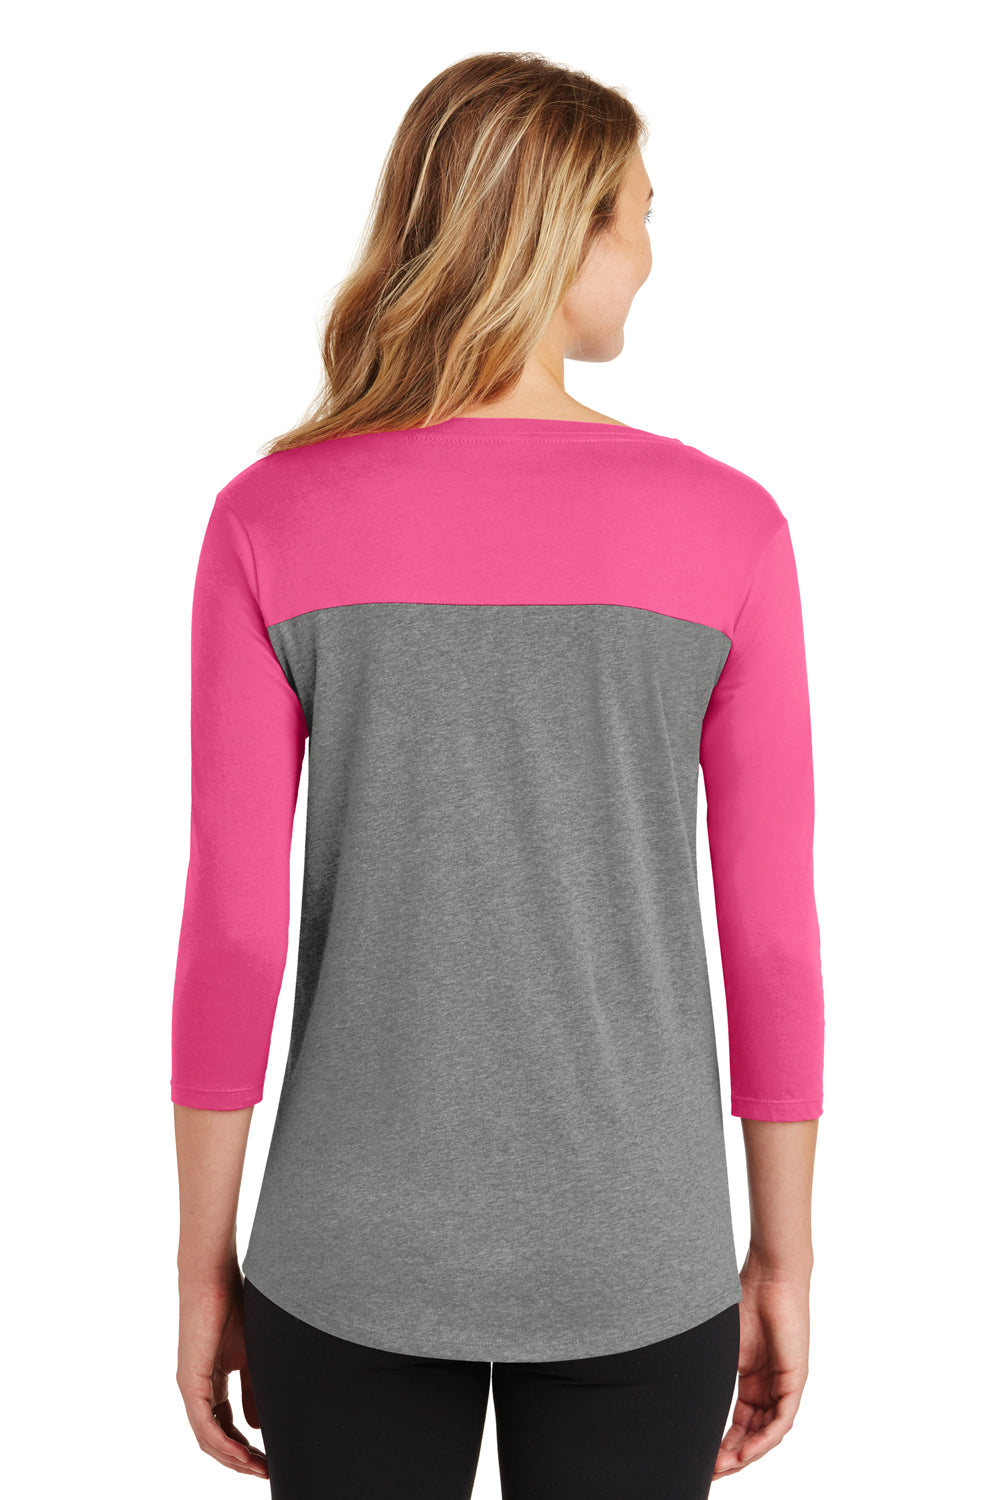 District DT2700 Womens Rally 3/4 Sleeve Wide Neck T-Shirt Heather Grey/Pink Back